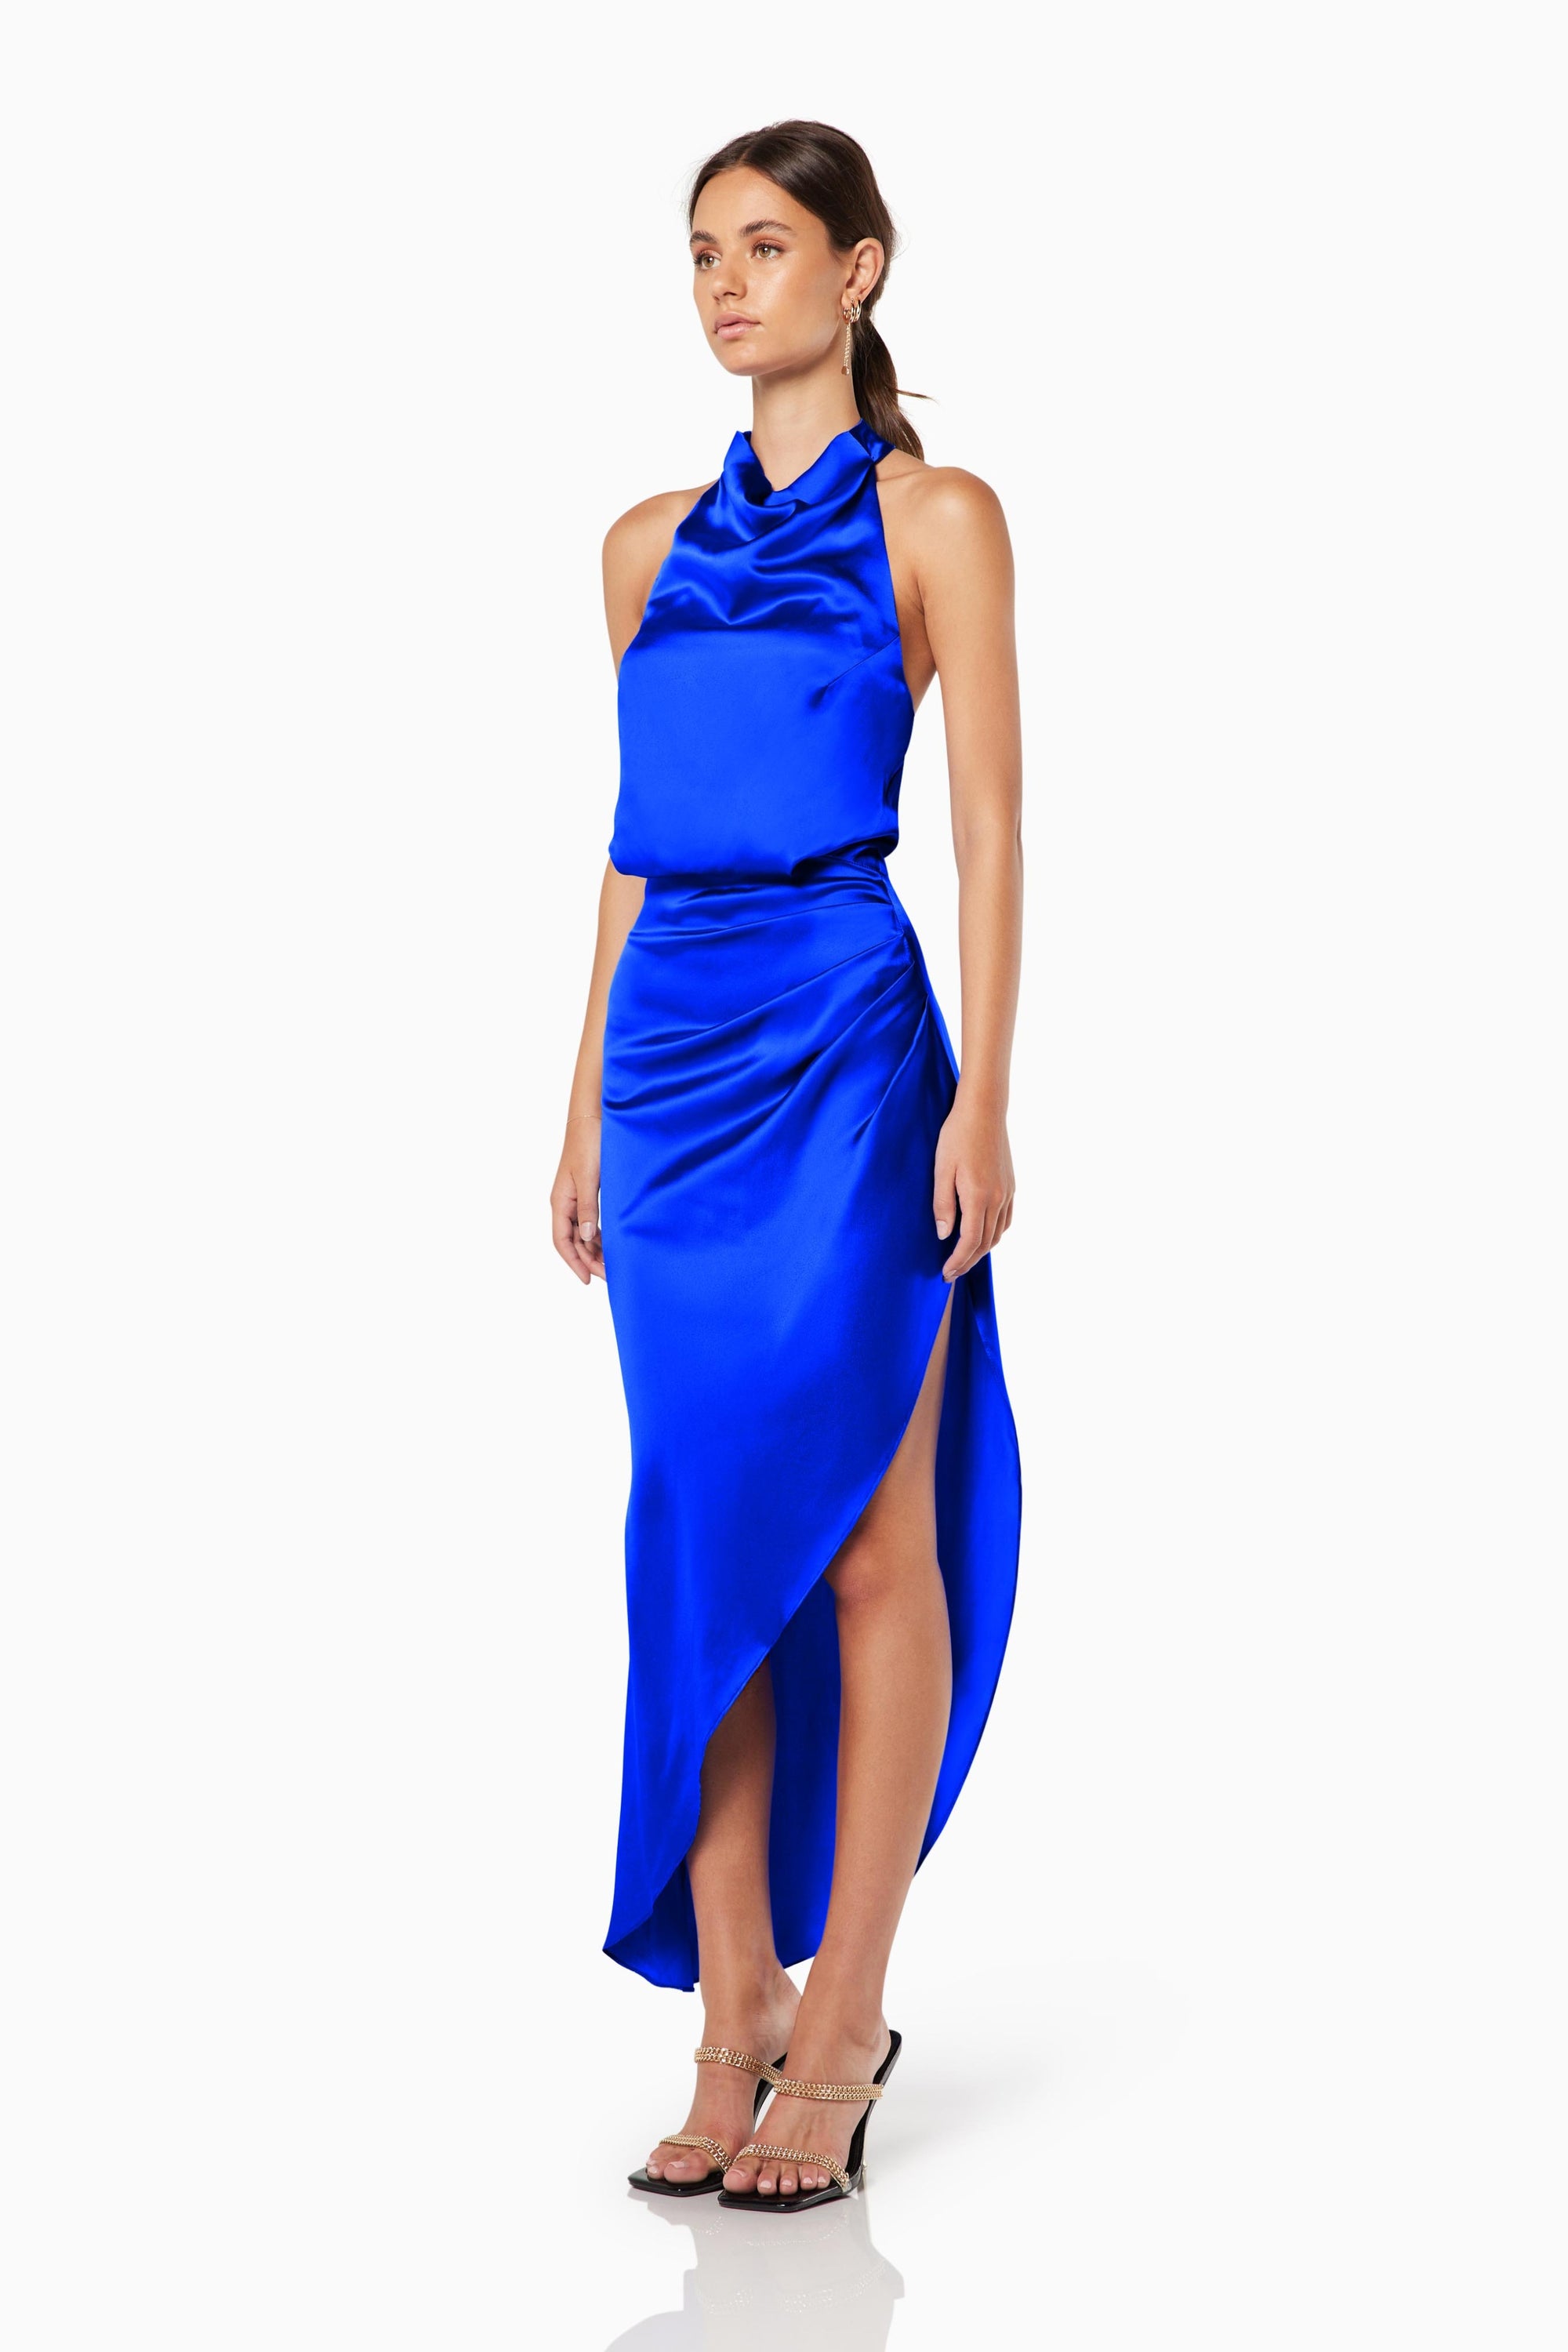 Picturesque Dress in Electric Blue